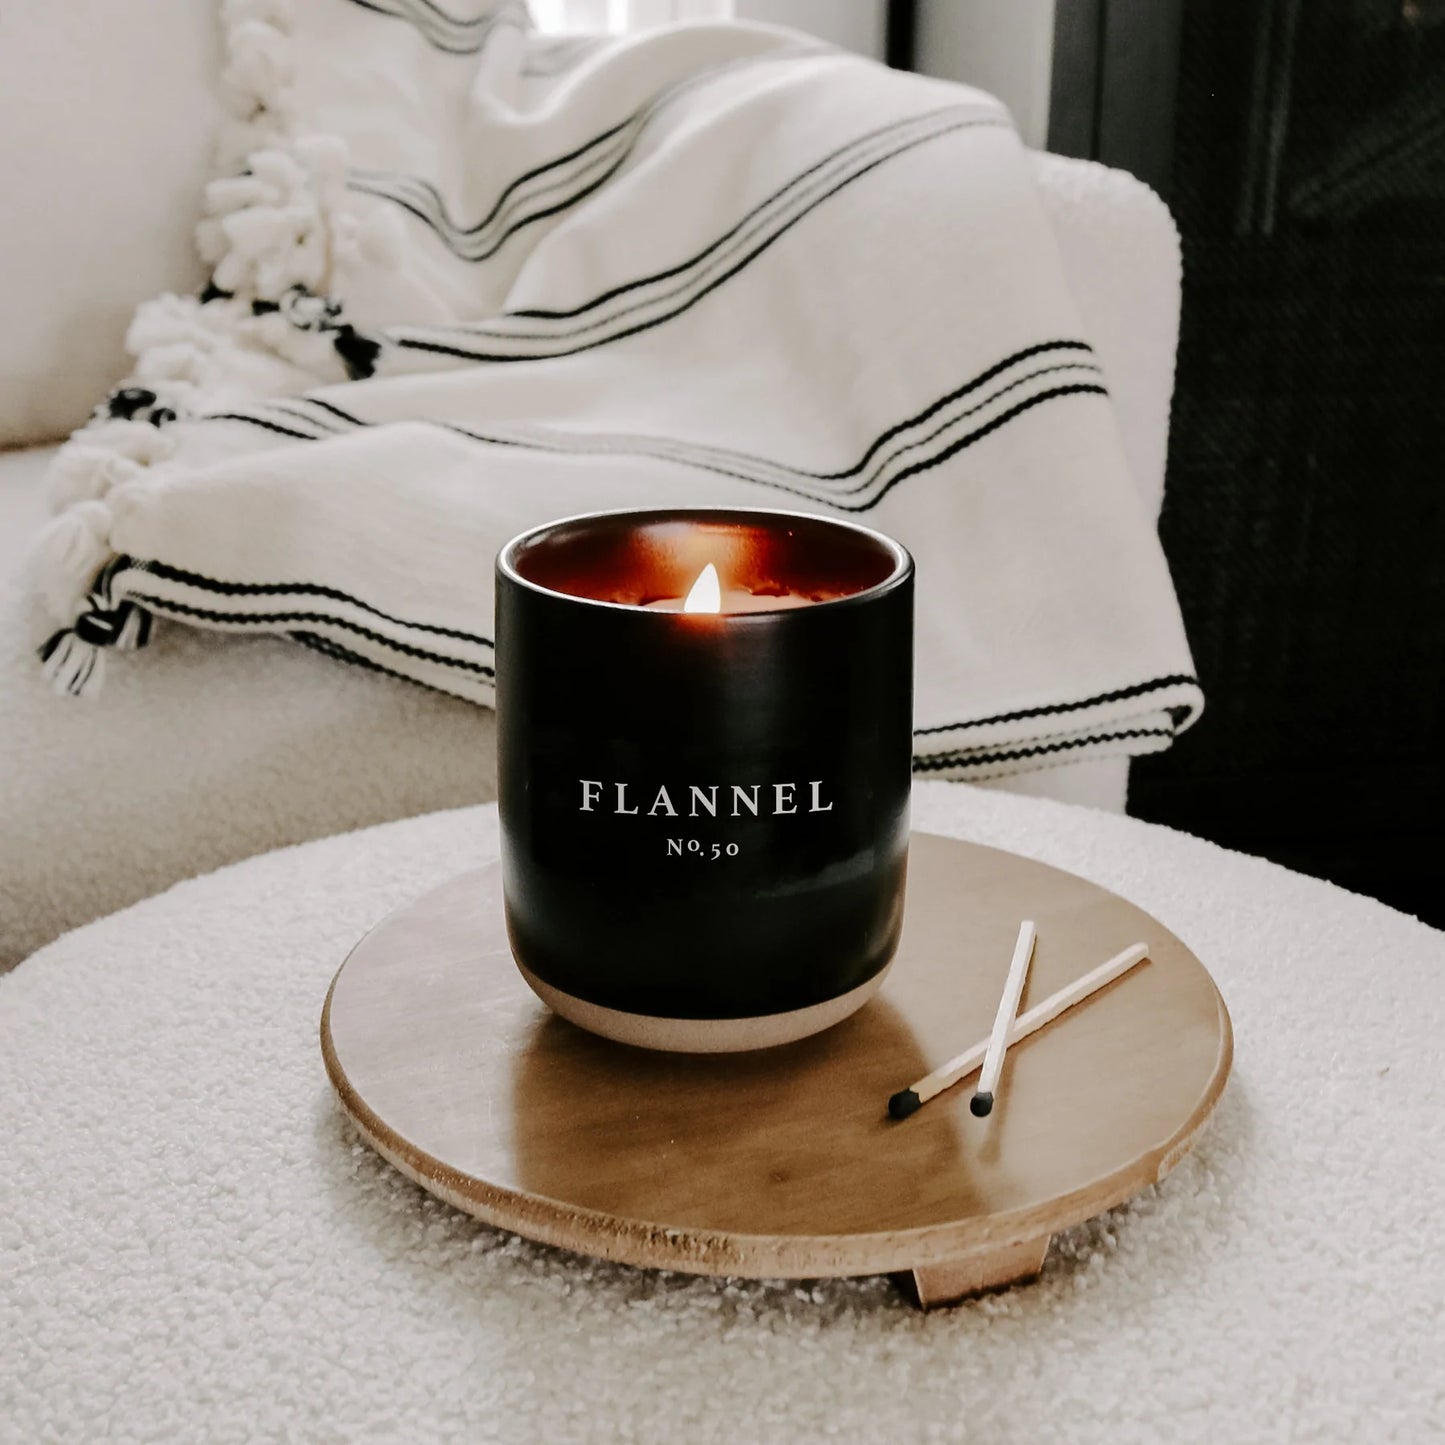 Flannel Soy Candle Stoneware Jar